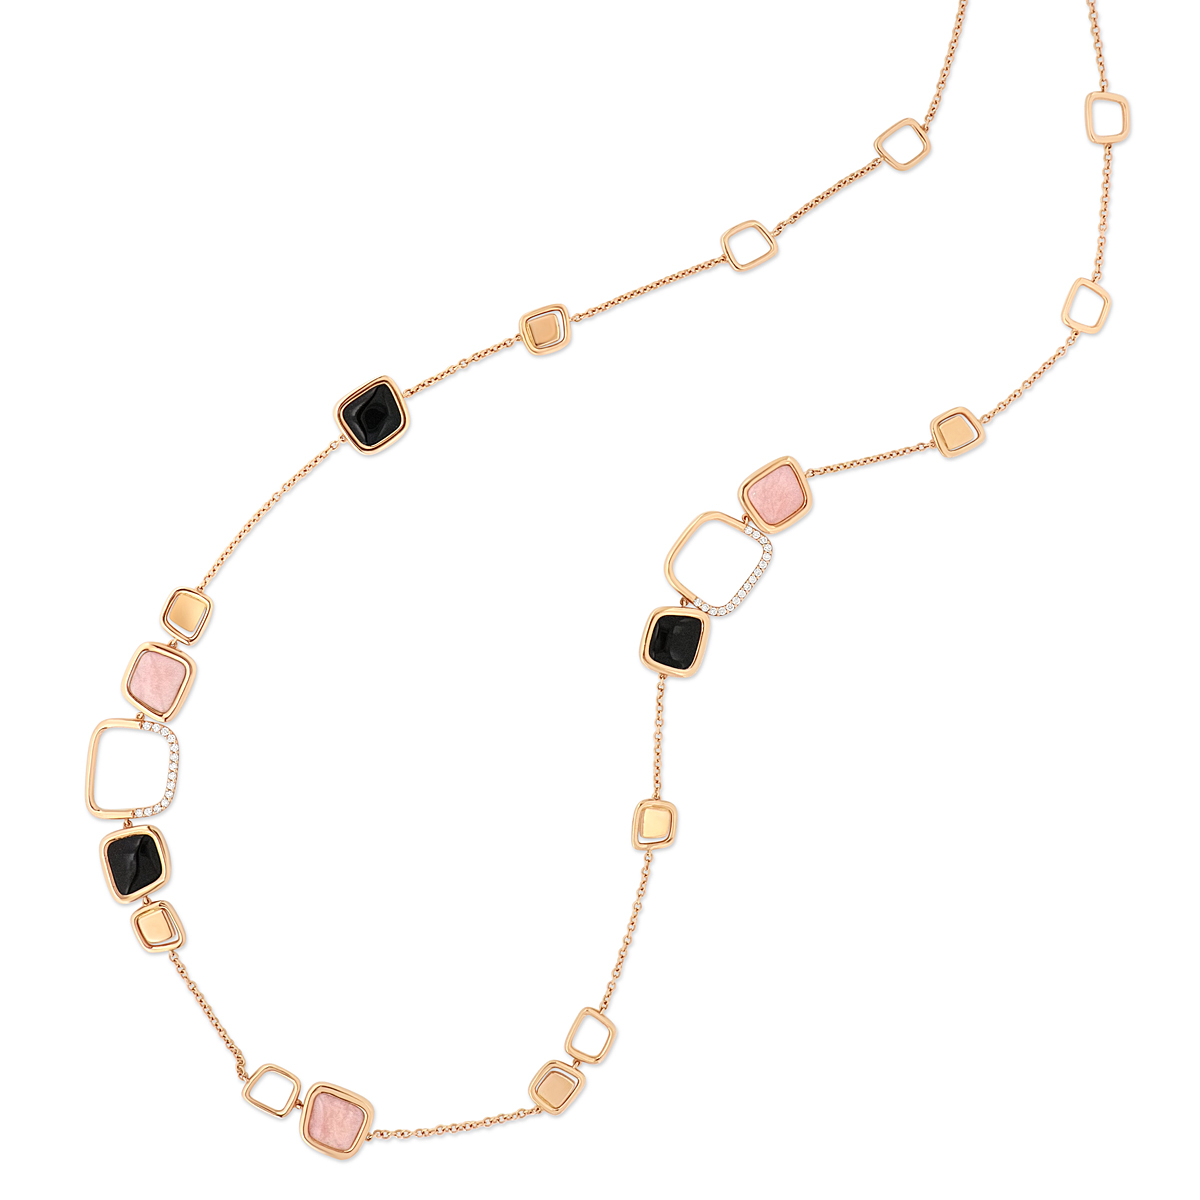 Onyx and Pink Opal Long Square Necklace in 18K Rose Gold